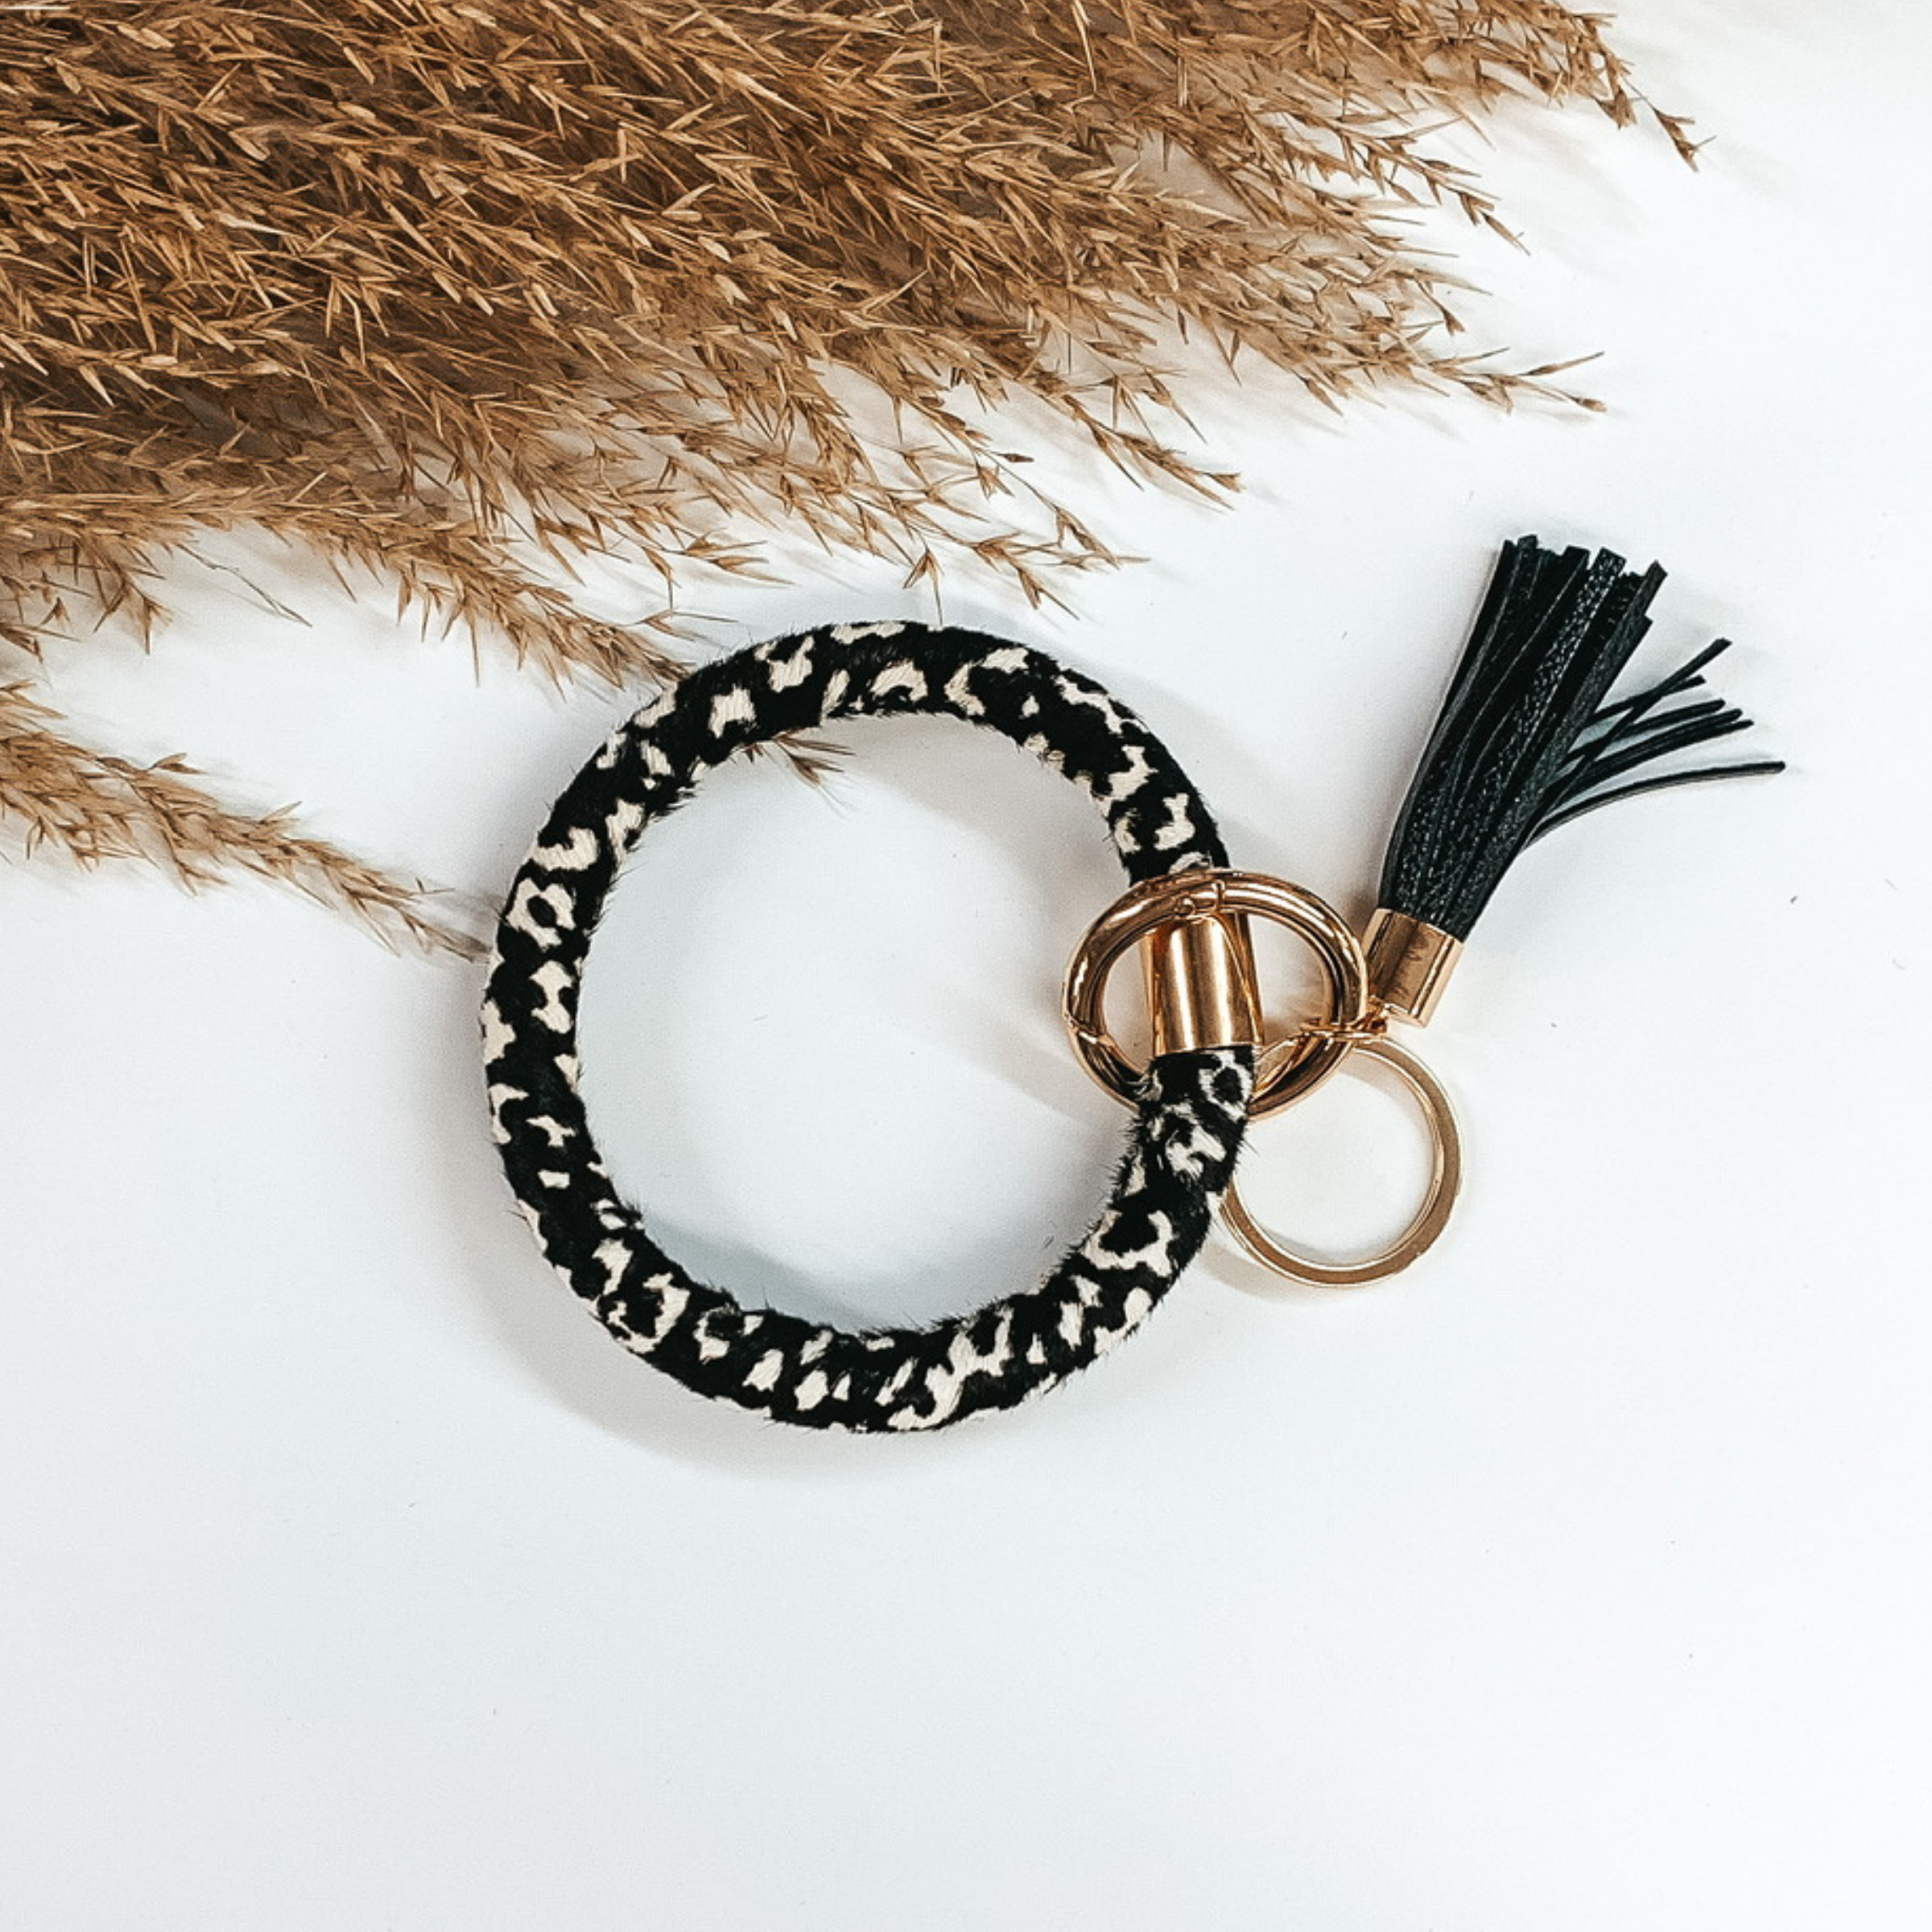 Running Wild Leather Bangle Key Ring in Black/White - Giddy Up Glamour Boutique